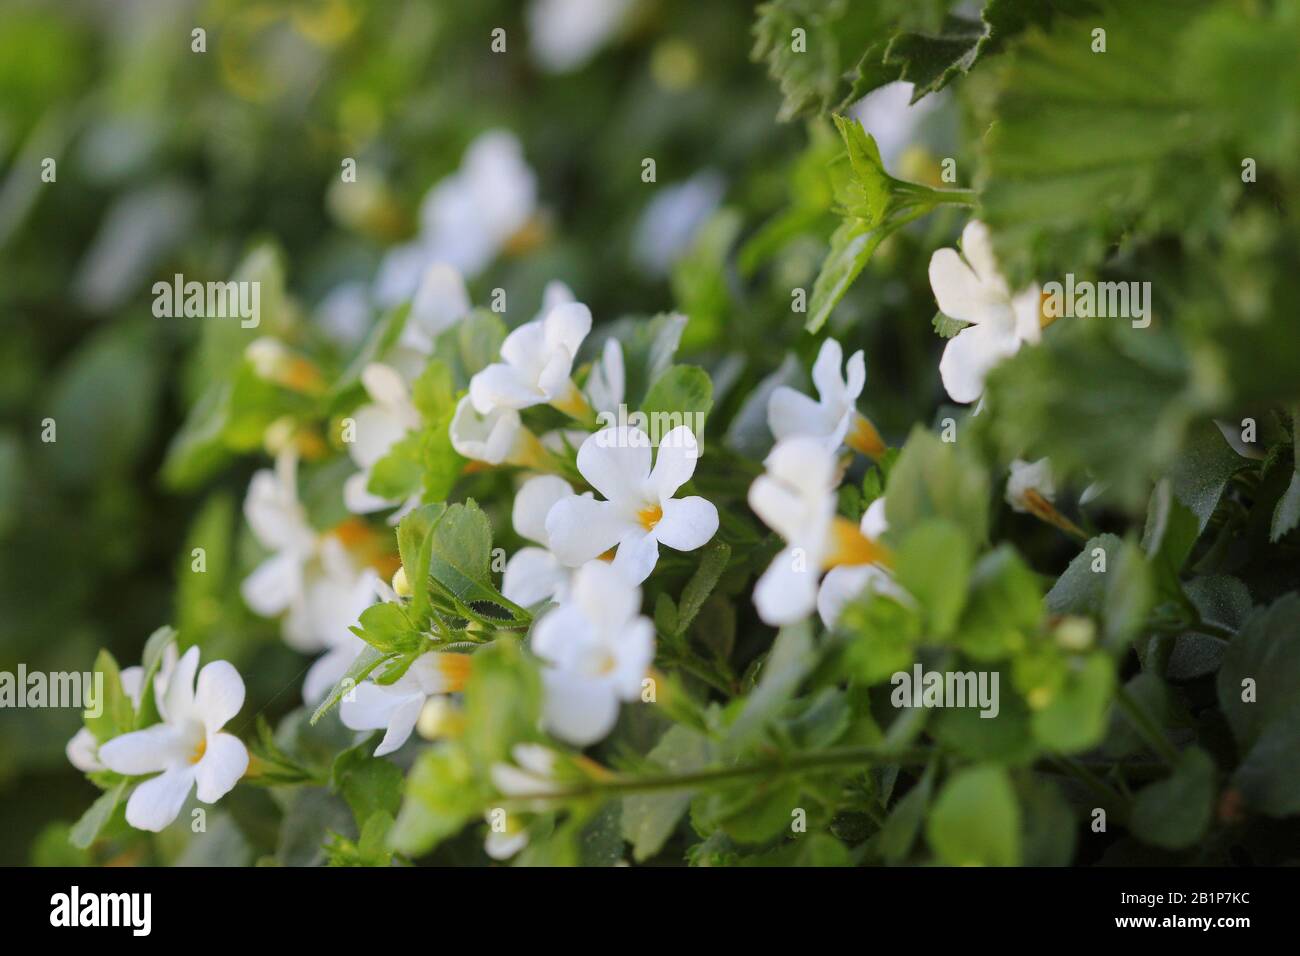 Bacopa monnieri, herb Bacopa is a medicinal herb used in Ayurveda, also known as 'Brahmi', a herbal memory . Stock Photo